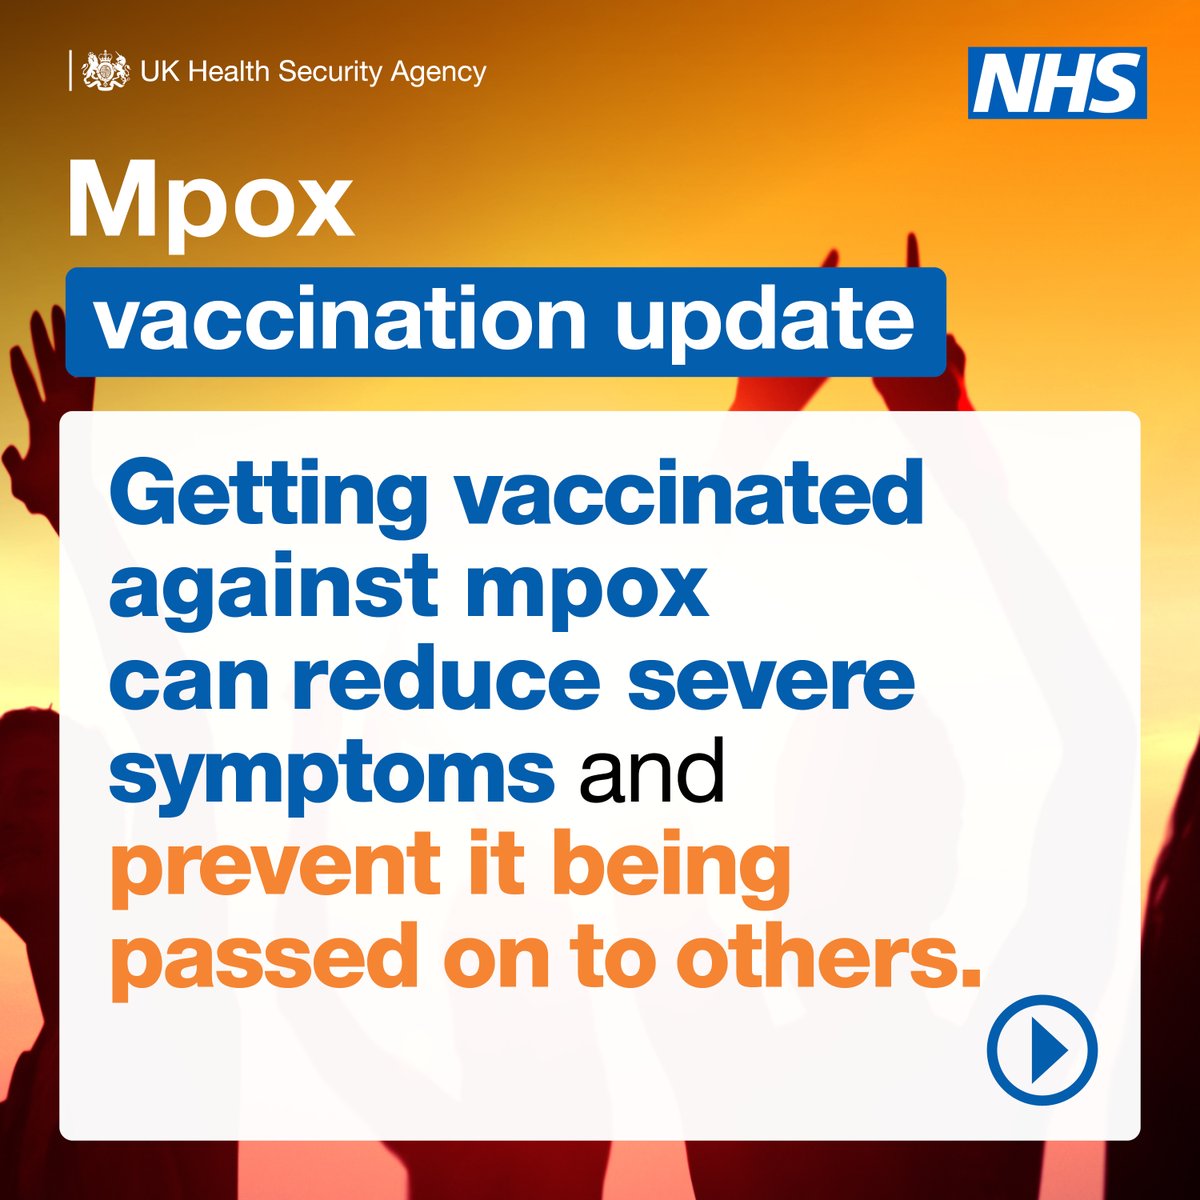 Mpox vaccine appointments available tomorrow evening in Central London, book online sexualhealth.cnwl.nhs.uk/mpox-vaccinati…